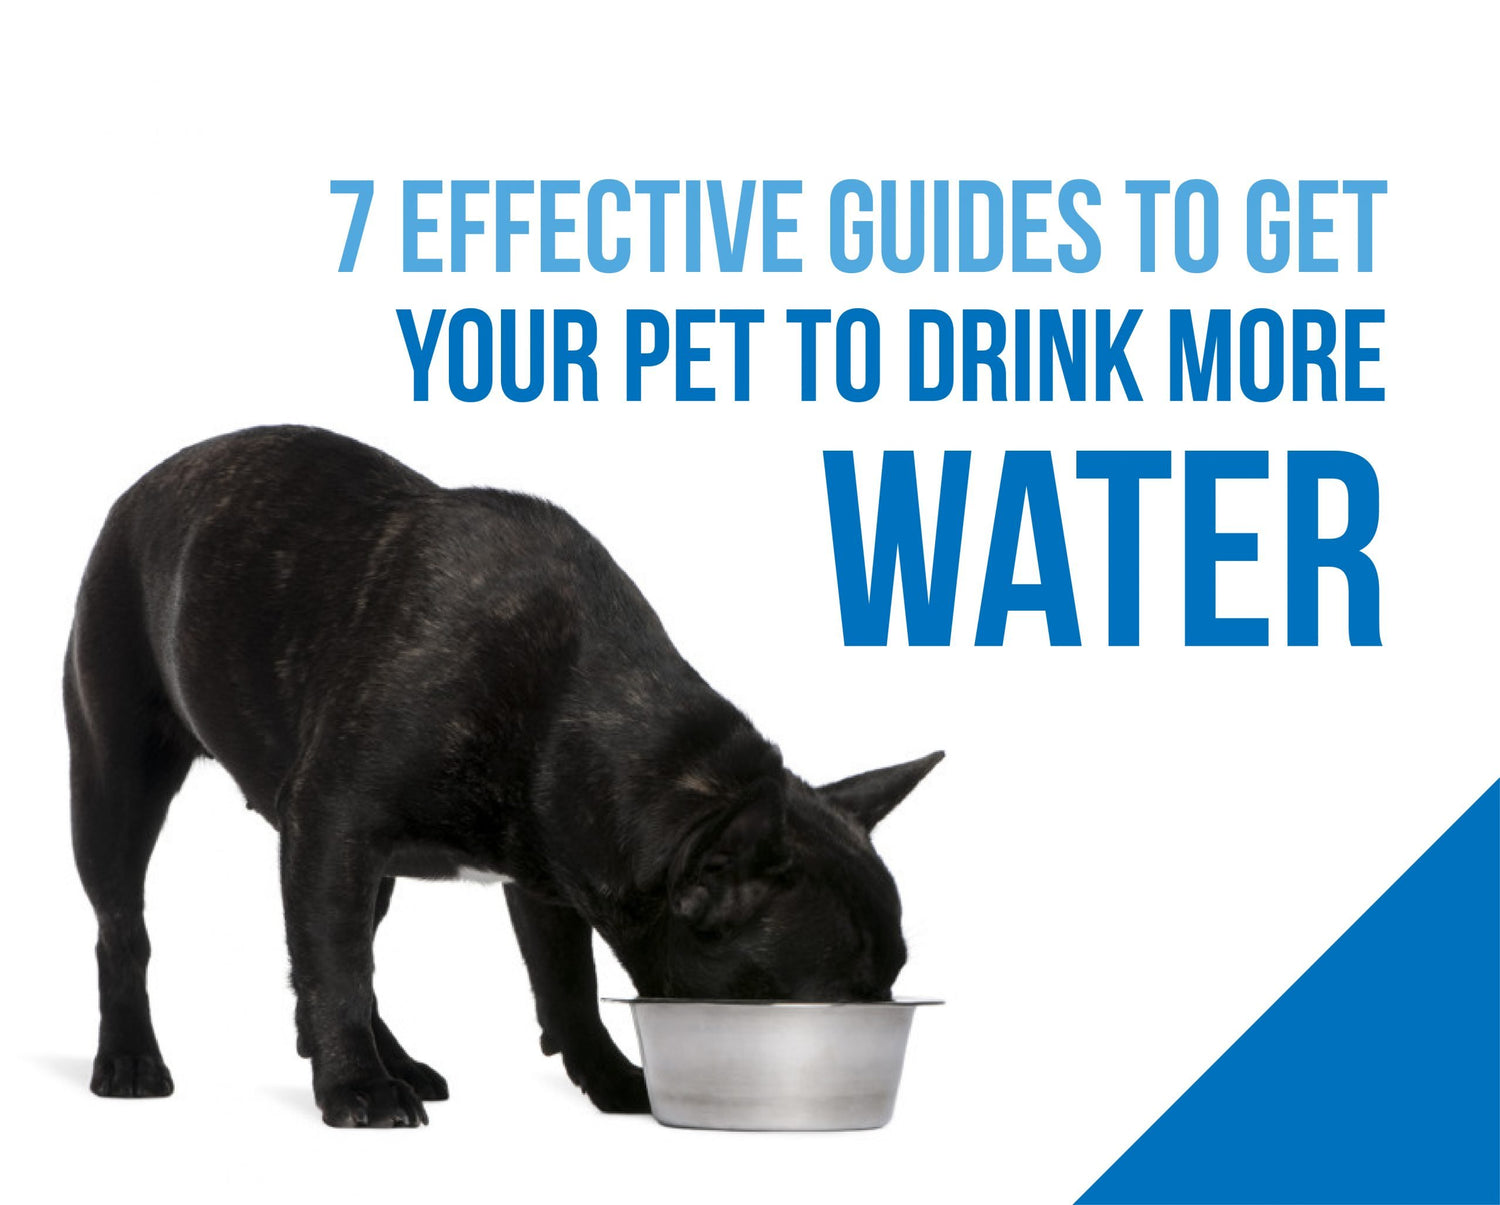 7 Effective Guides to Get Your Pet to Drink More Water